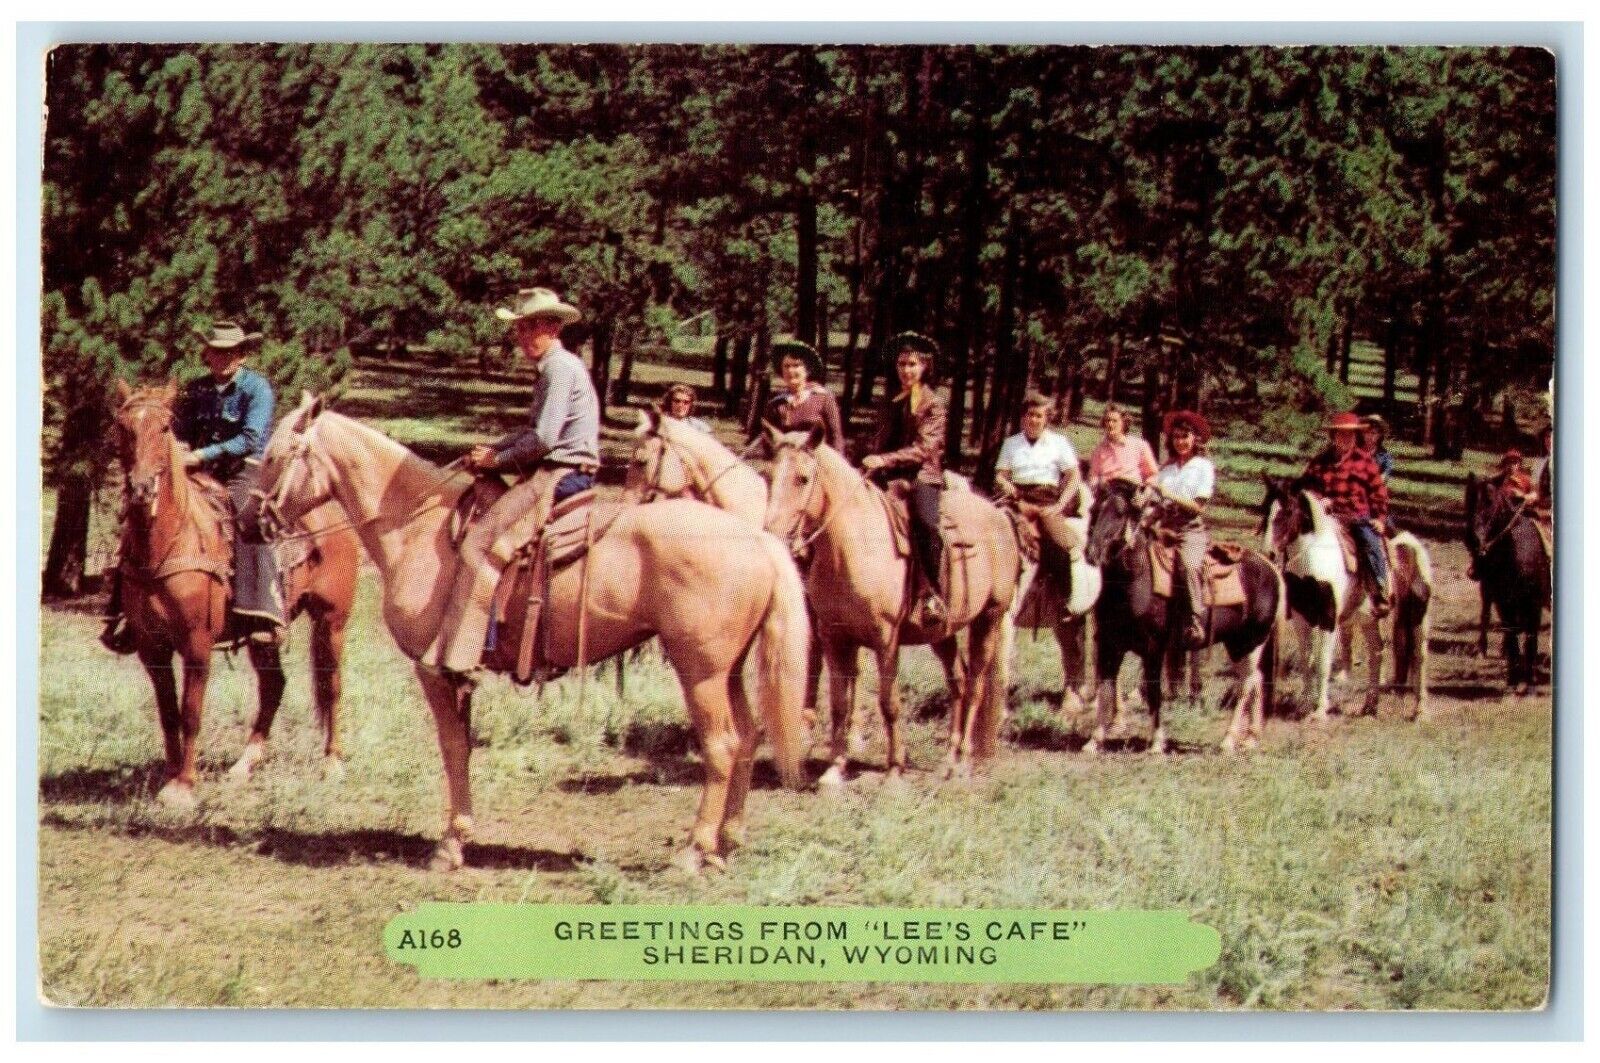 c1960 Greetings Lee's Cafe Horse Riding Field Sheridan Wyoming Rembrant Postcard